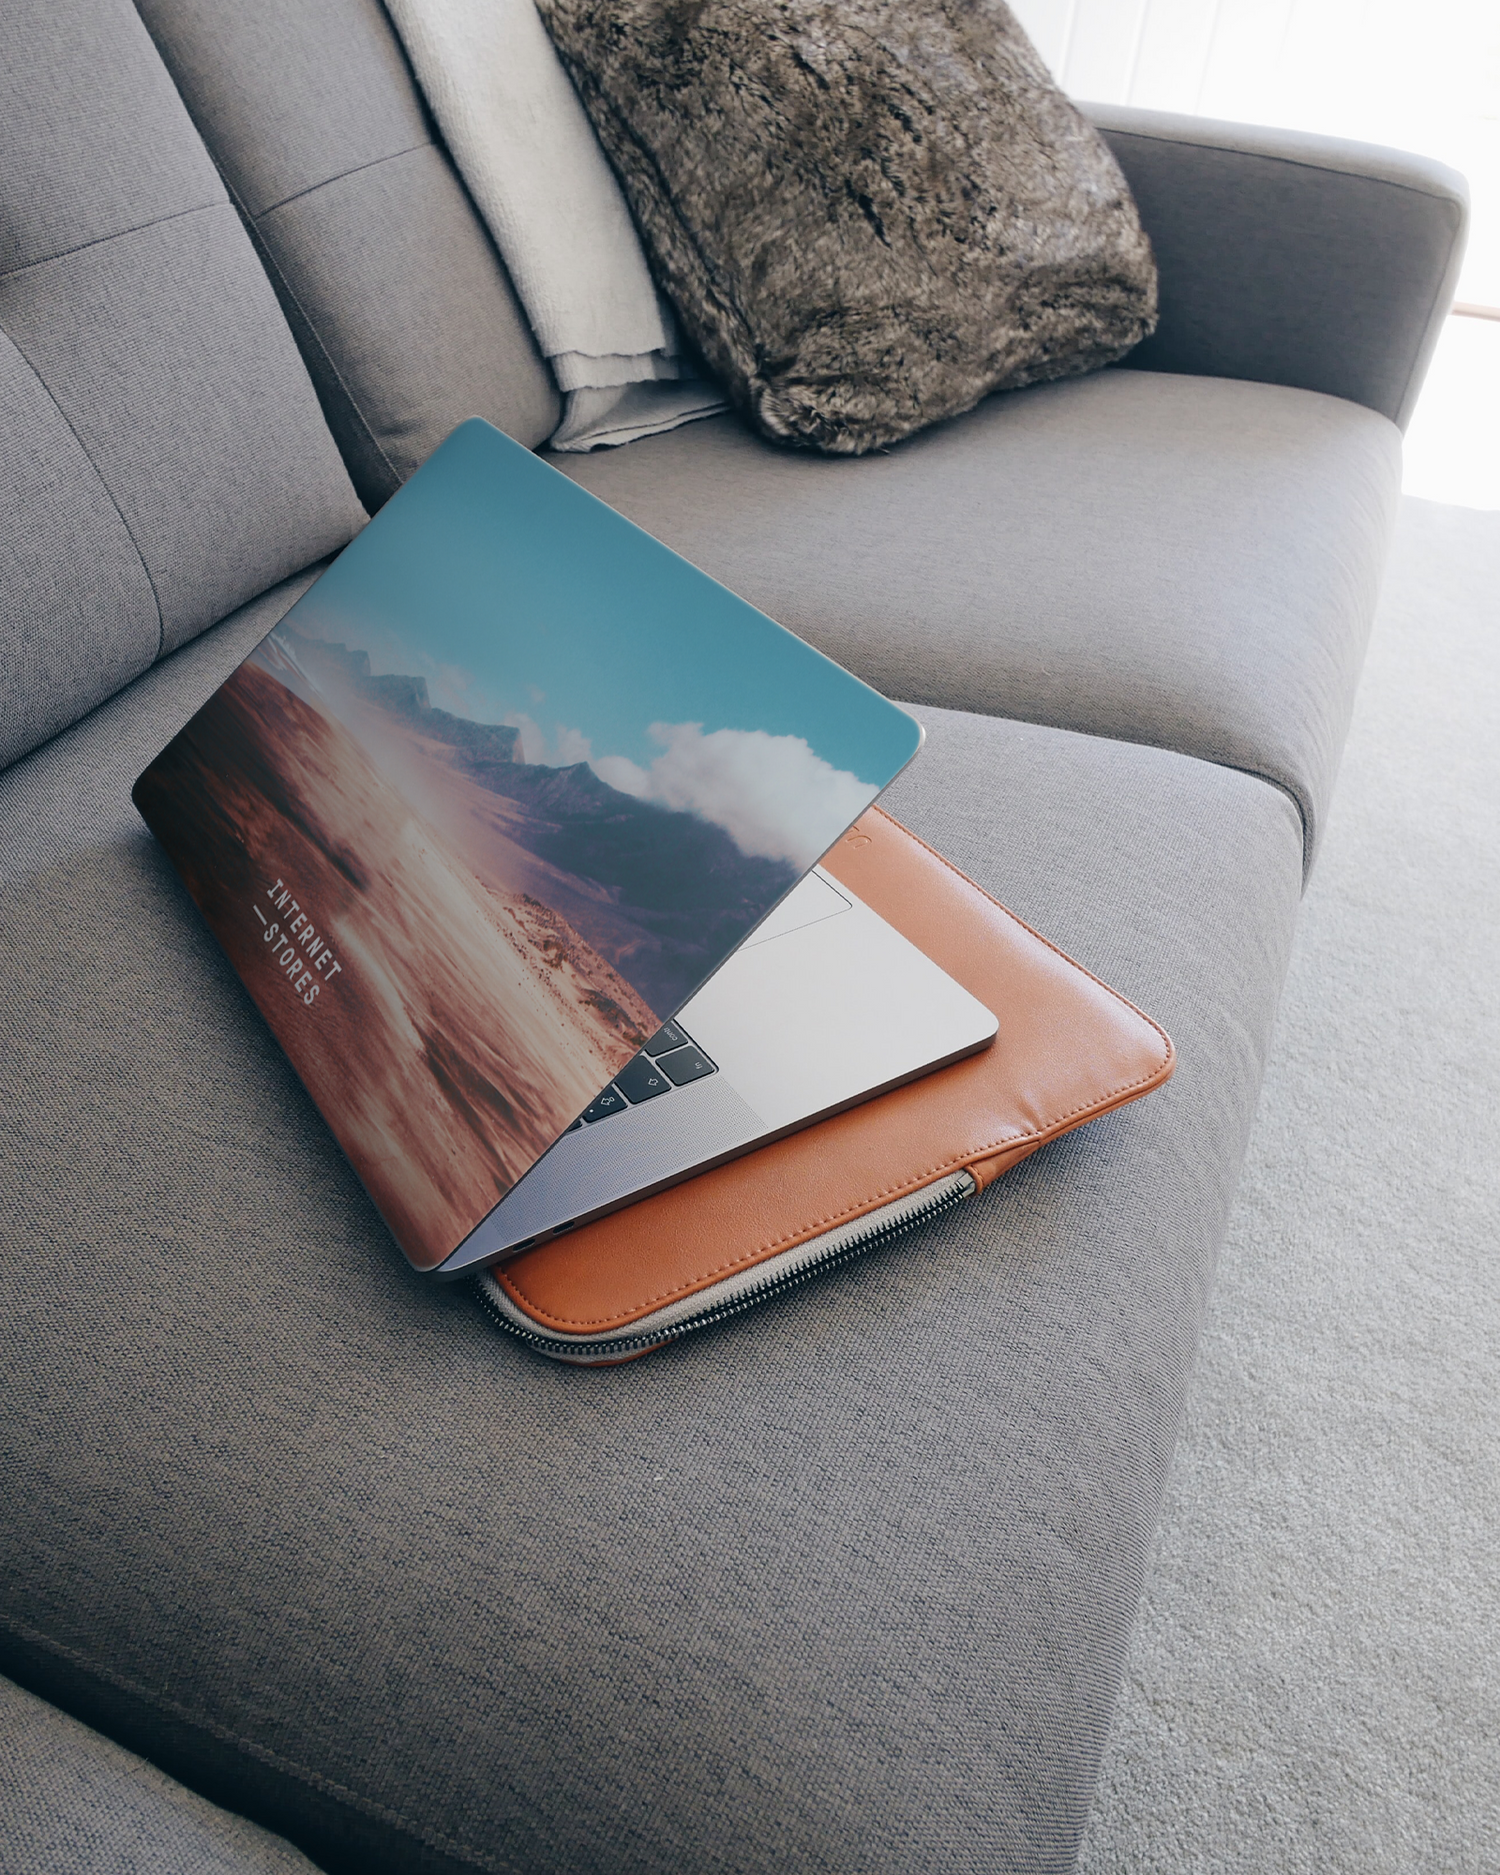 Sky Laptop Skin for 15 inch Apple MacBooks on a couch